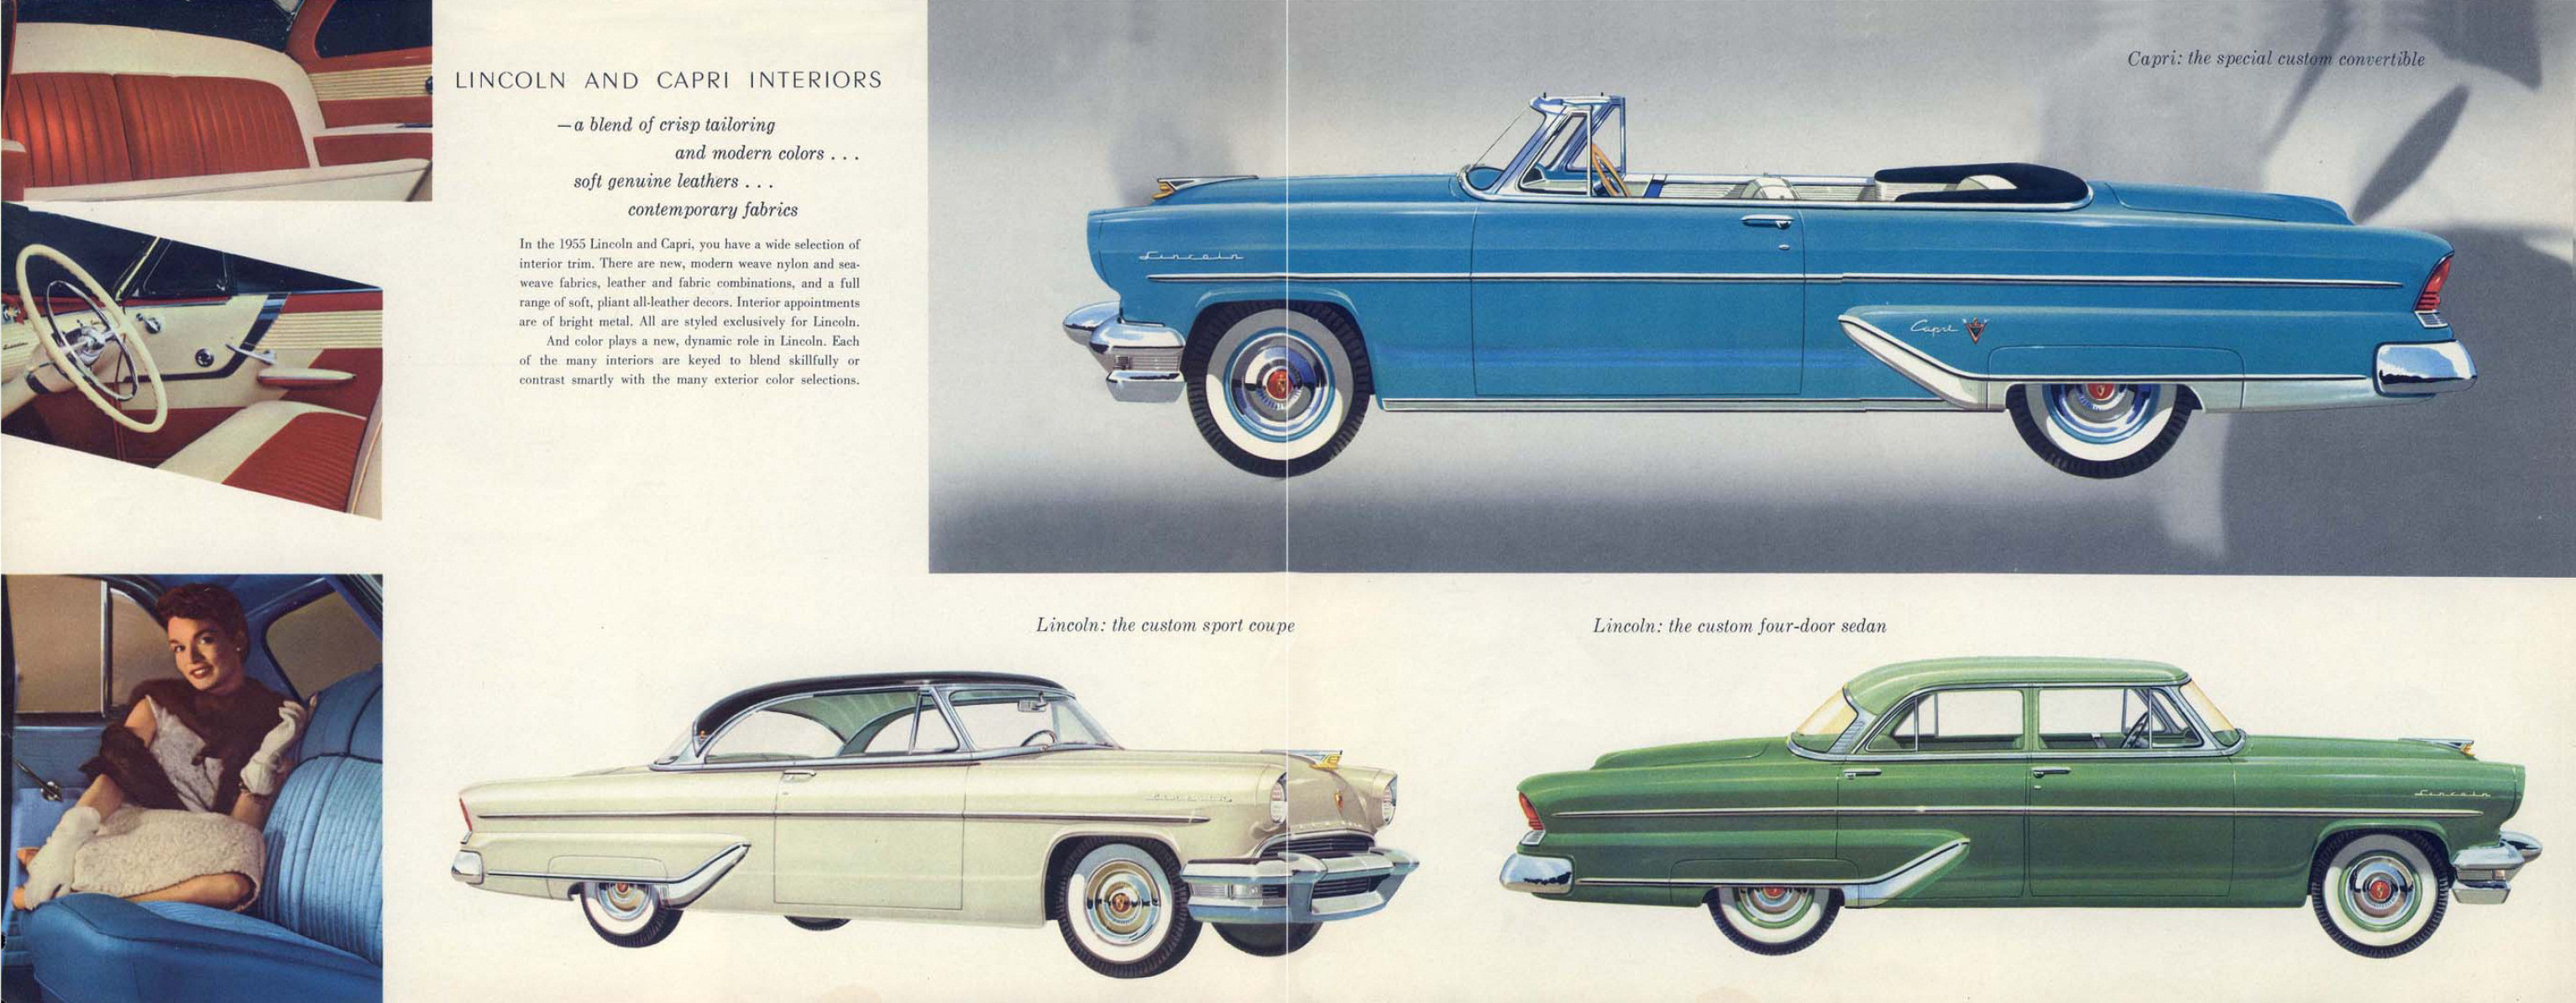 1955_Lincoln_Foldout-05-06